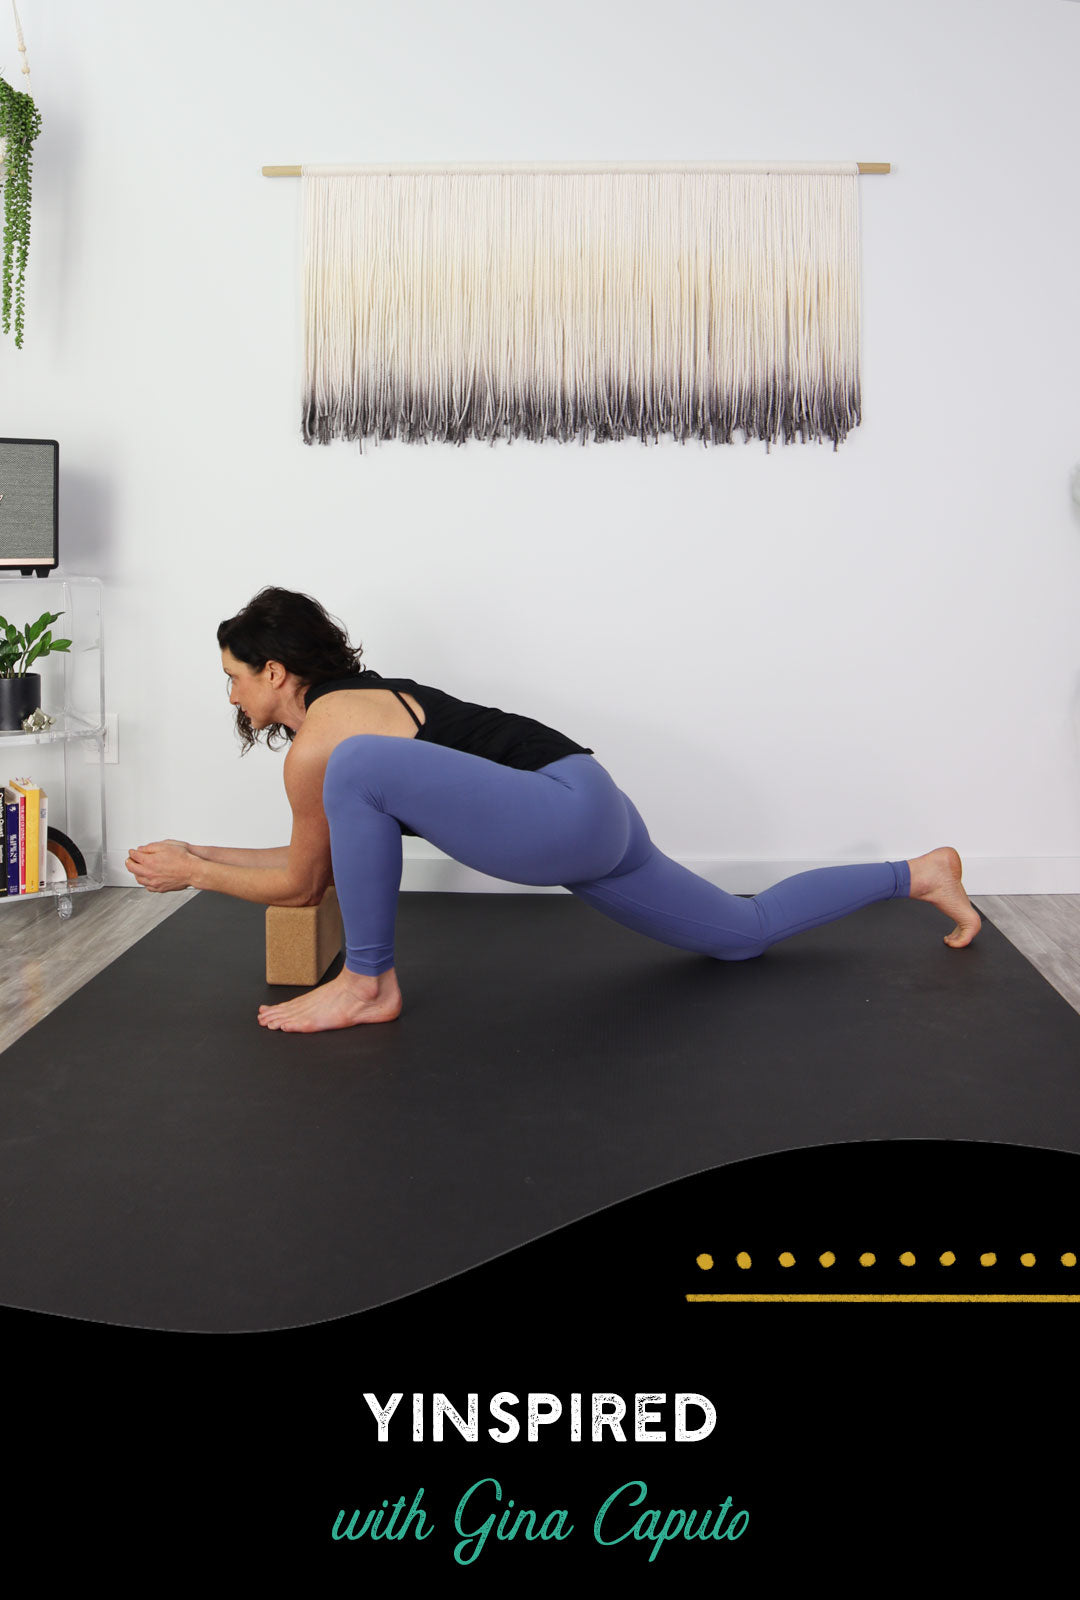 Can Beginners Do Yin Yoga? (A Complete Guide) - EMPOWER YOURWELLNESS